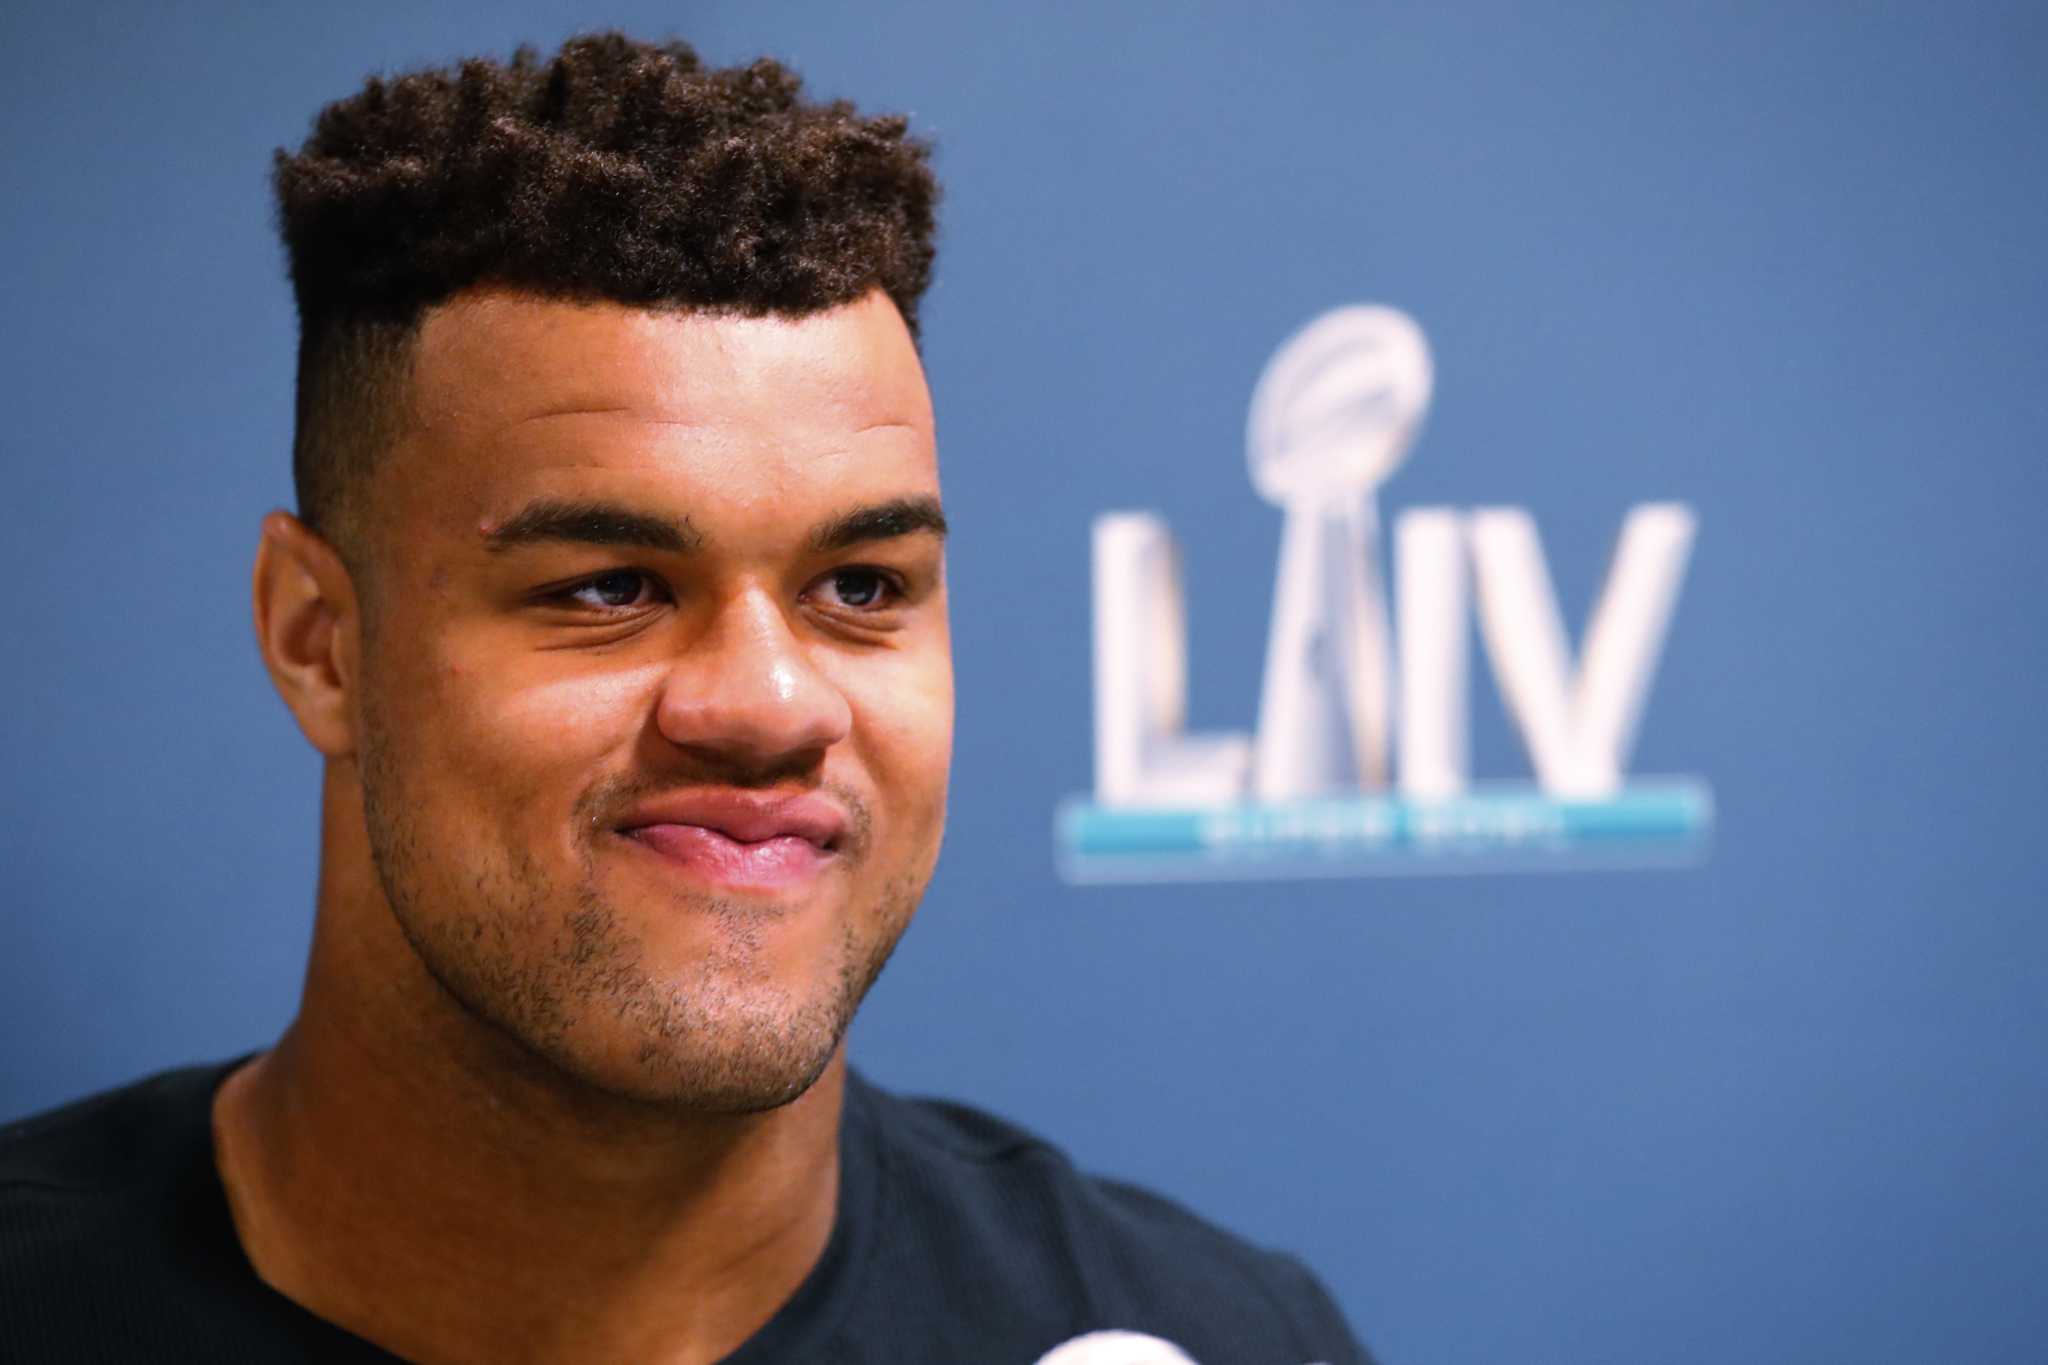 49ers' Arik Armstead on not being voted to Pro Bowl: 'I'm mad'